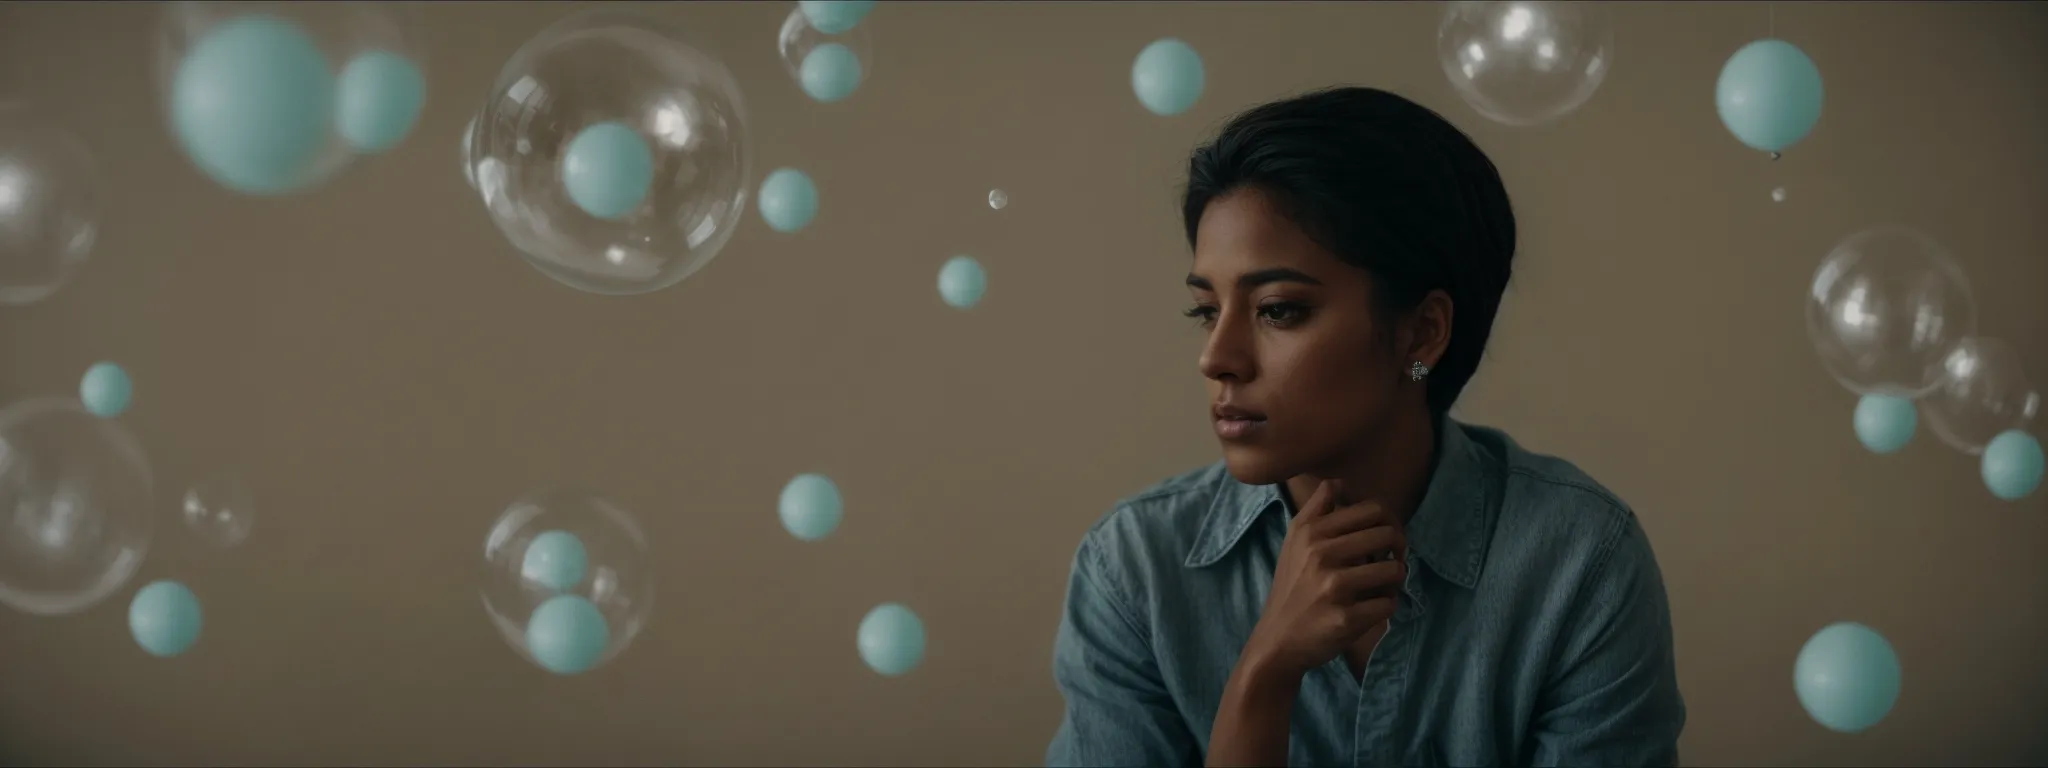 a person in a thoughtful pose, surrounded by keyword bubbles, with a magnifying glass hovering over a highlighted 